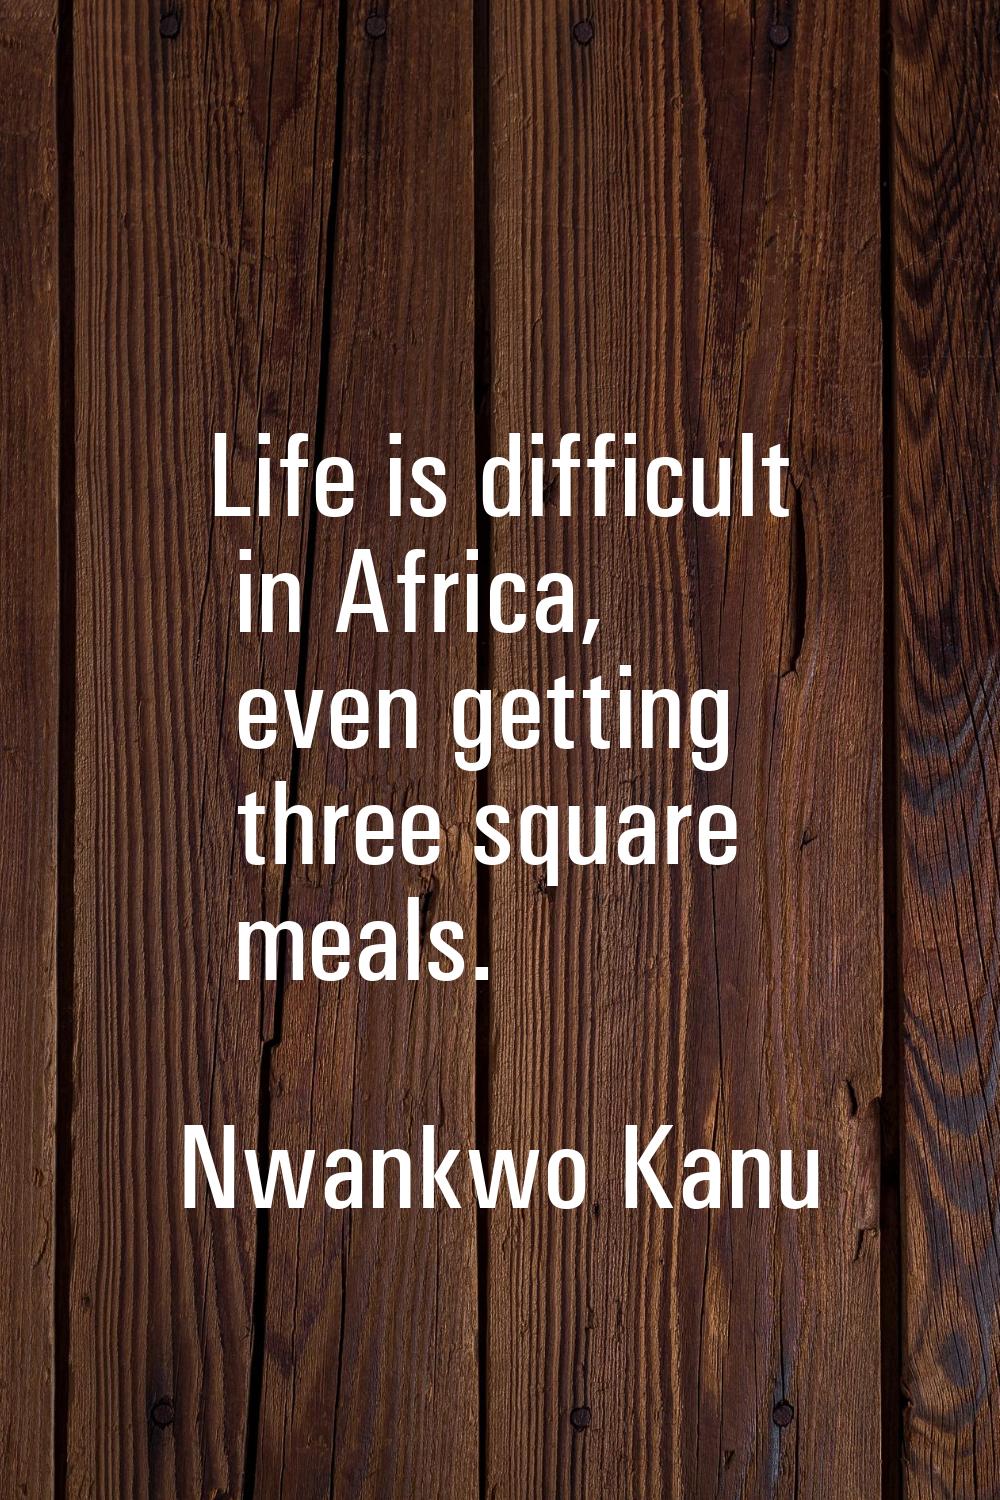 Life is difficult in Africa, even getting three square meals.